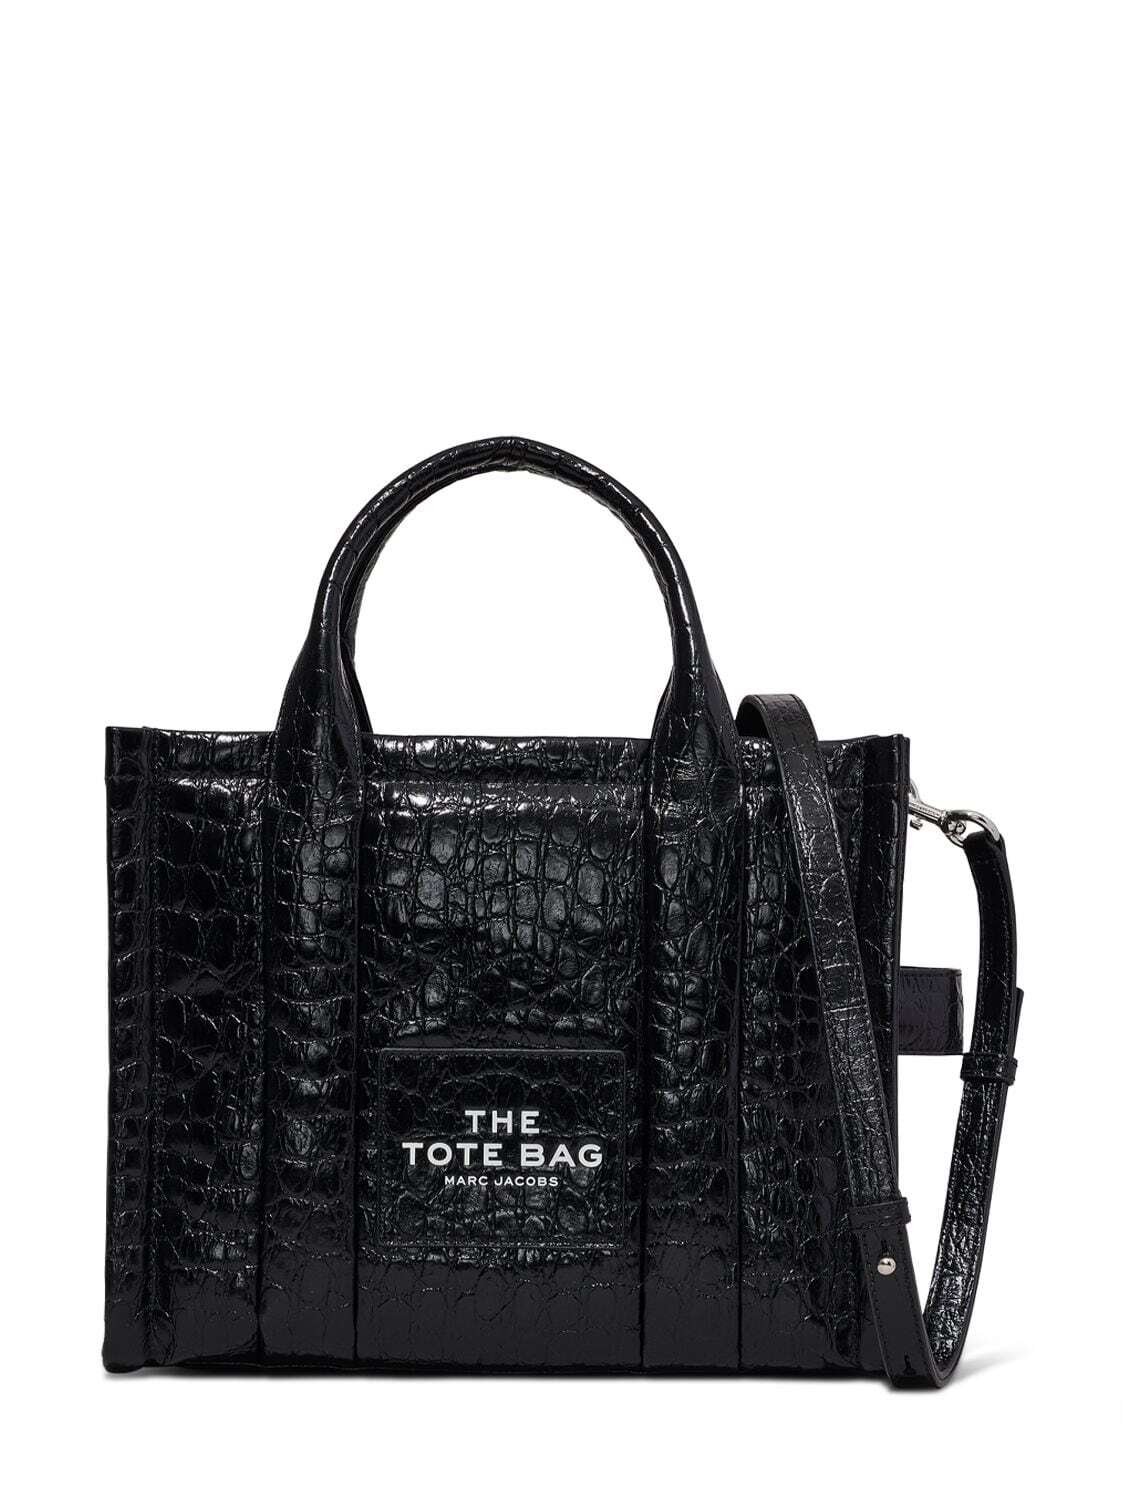 MARC JACOBS (THE) The Mini Tote Croc Embossed Bag in black